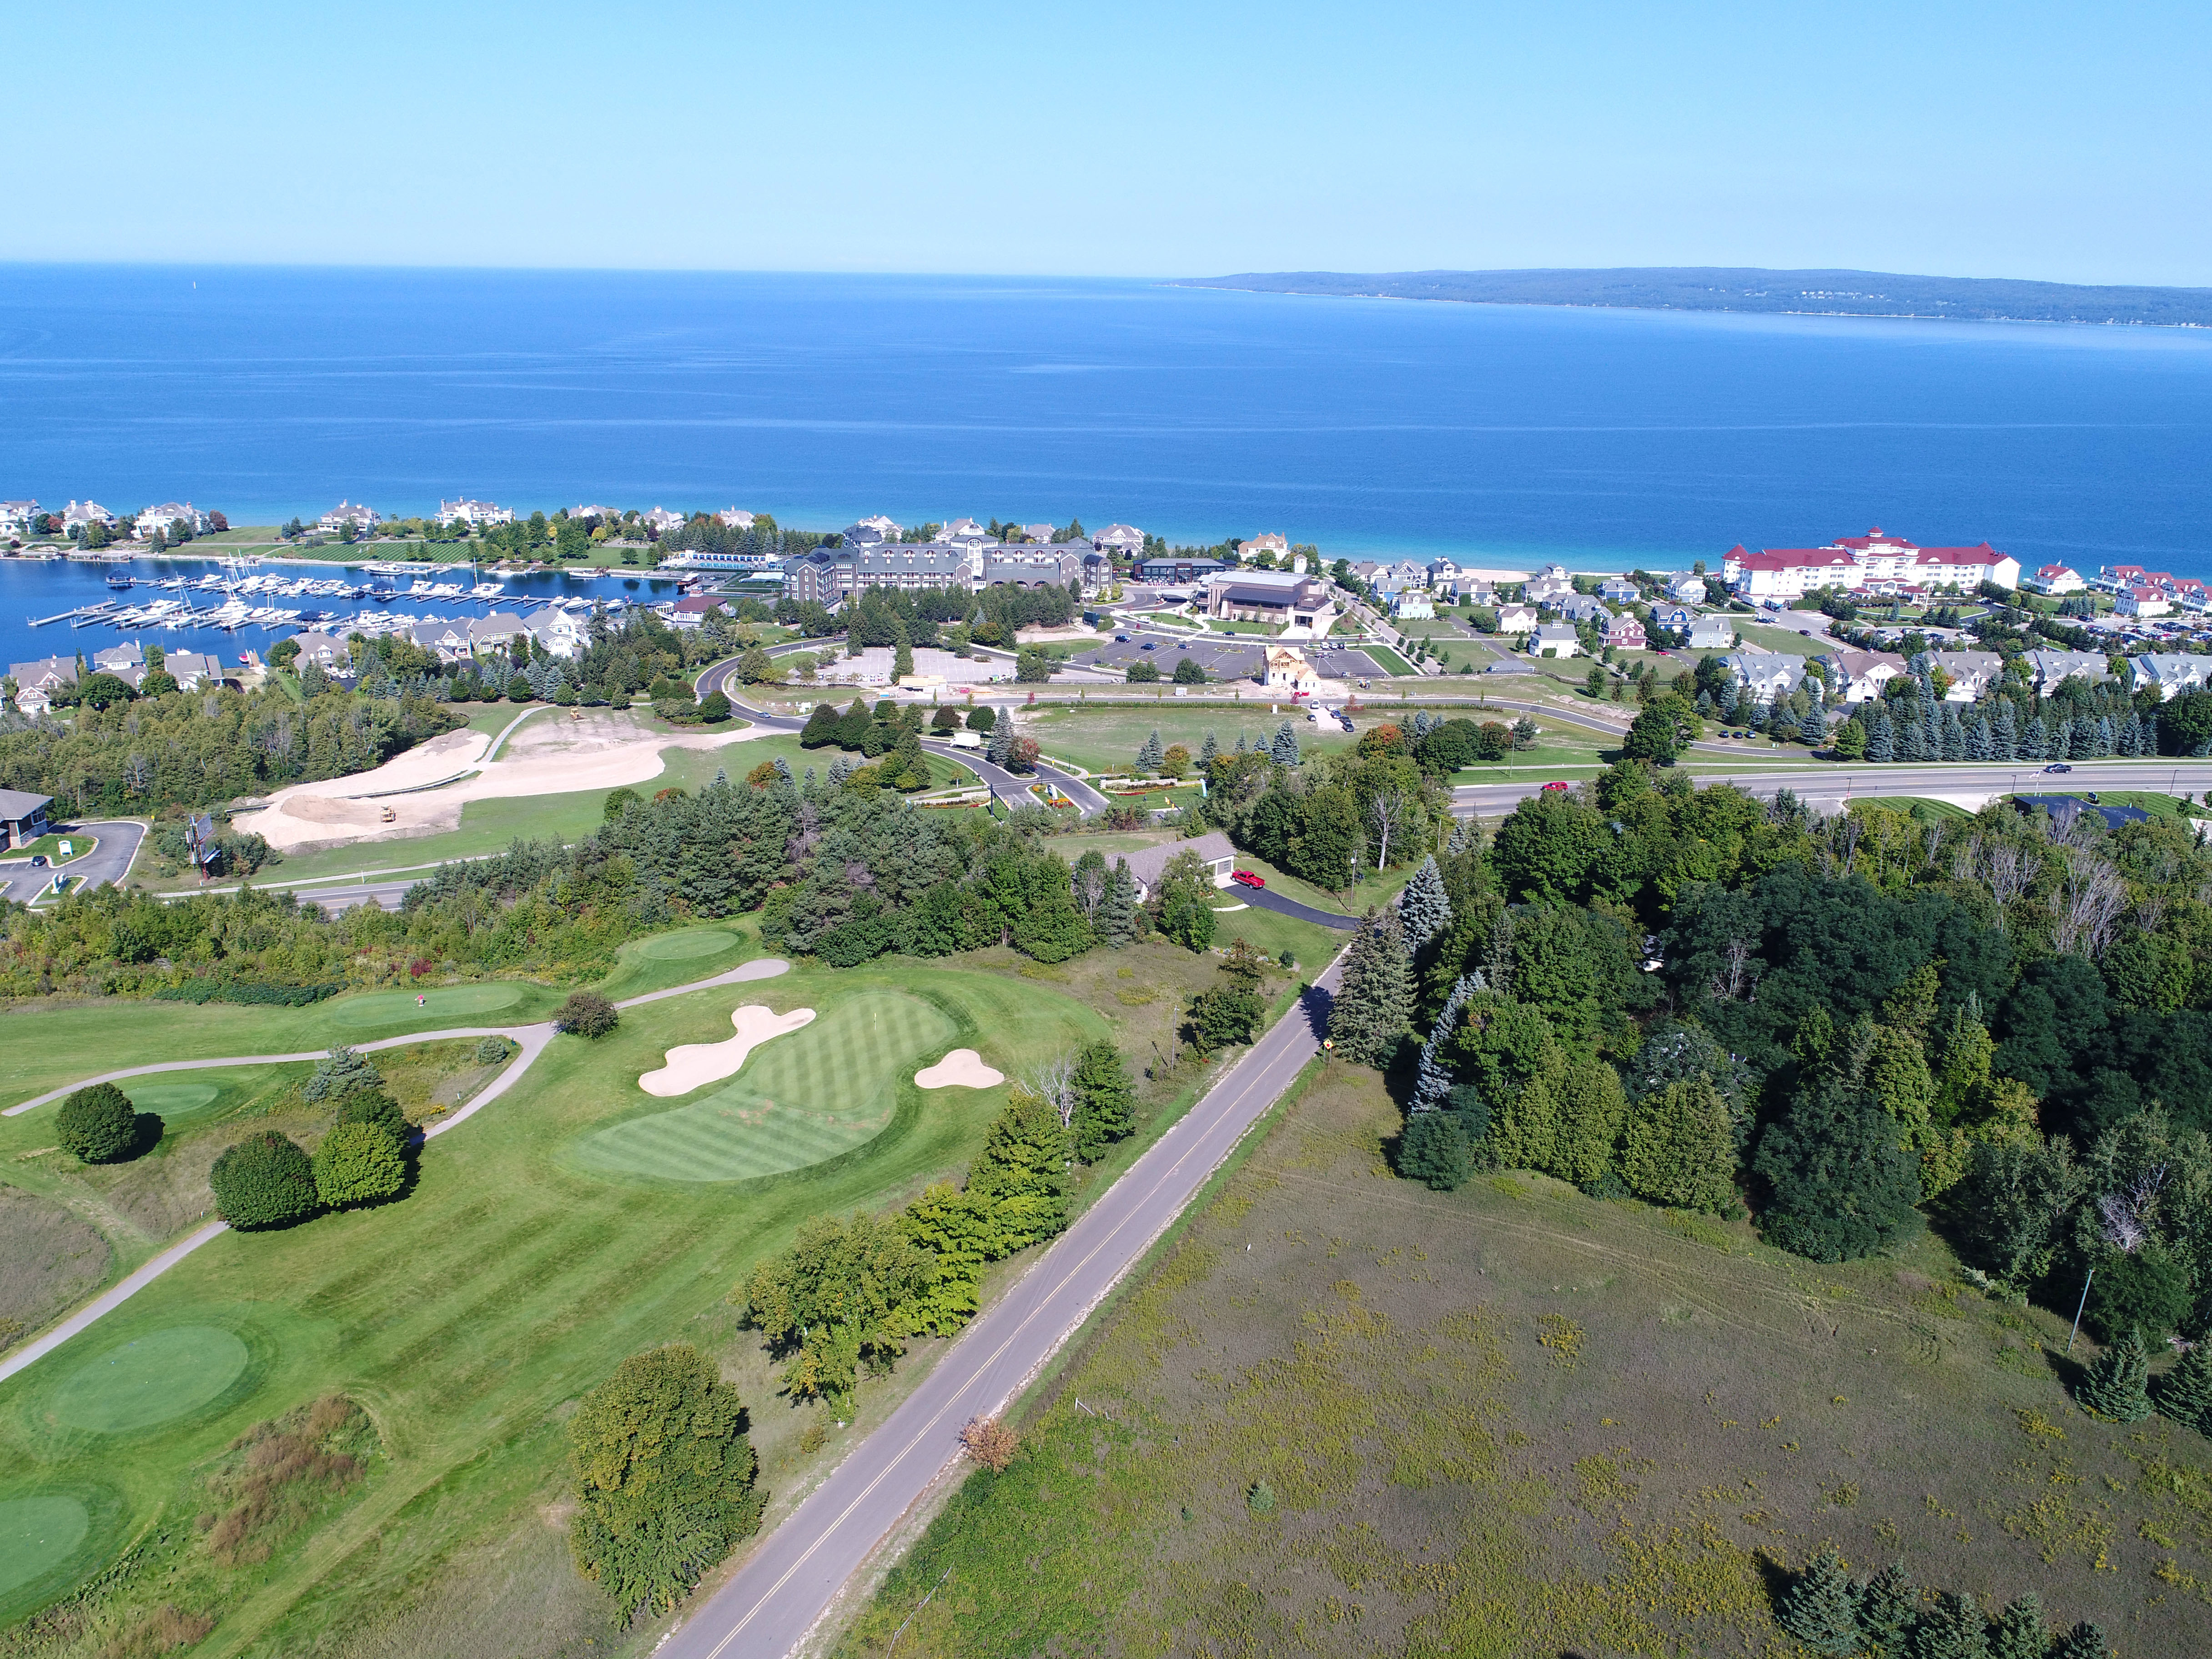 Aerial view of Bay Harbor, Michigan, with single-family homes for sale